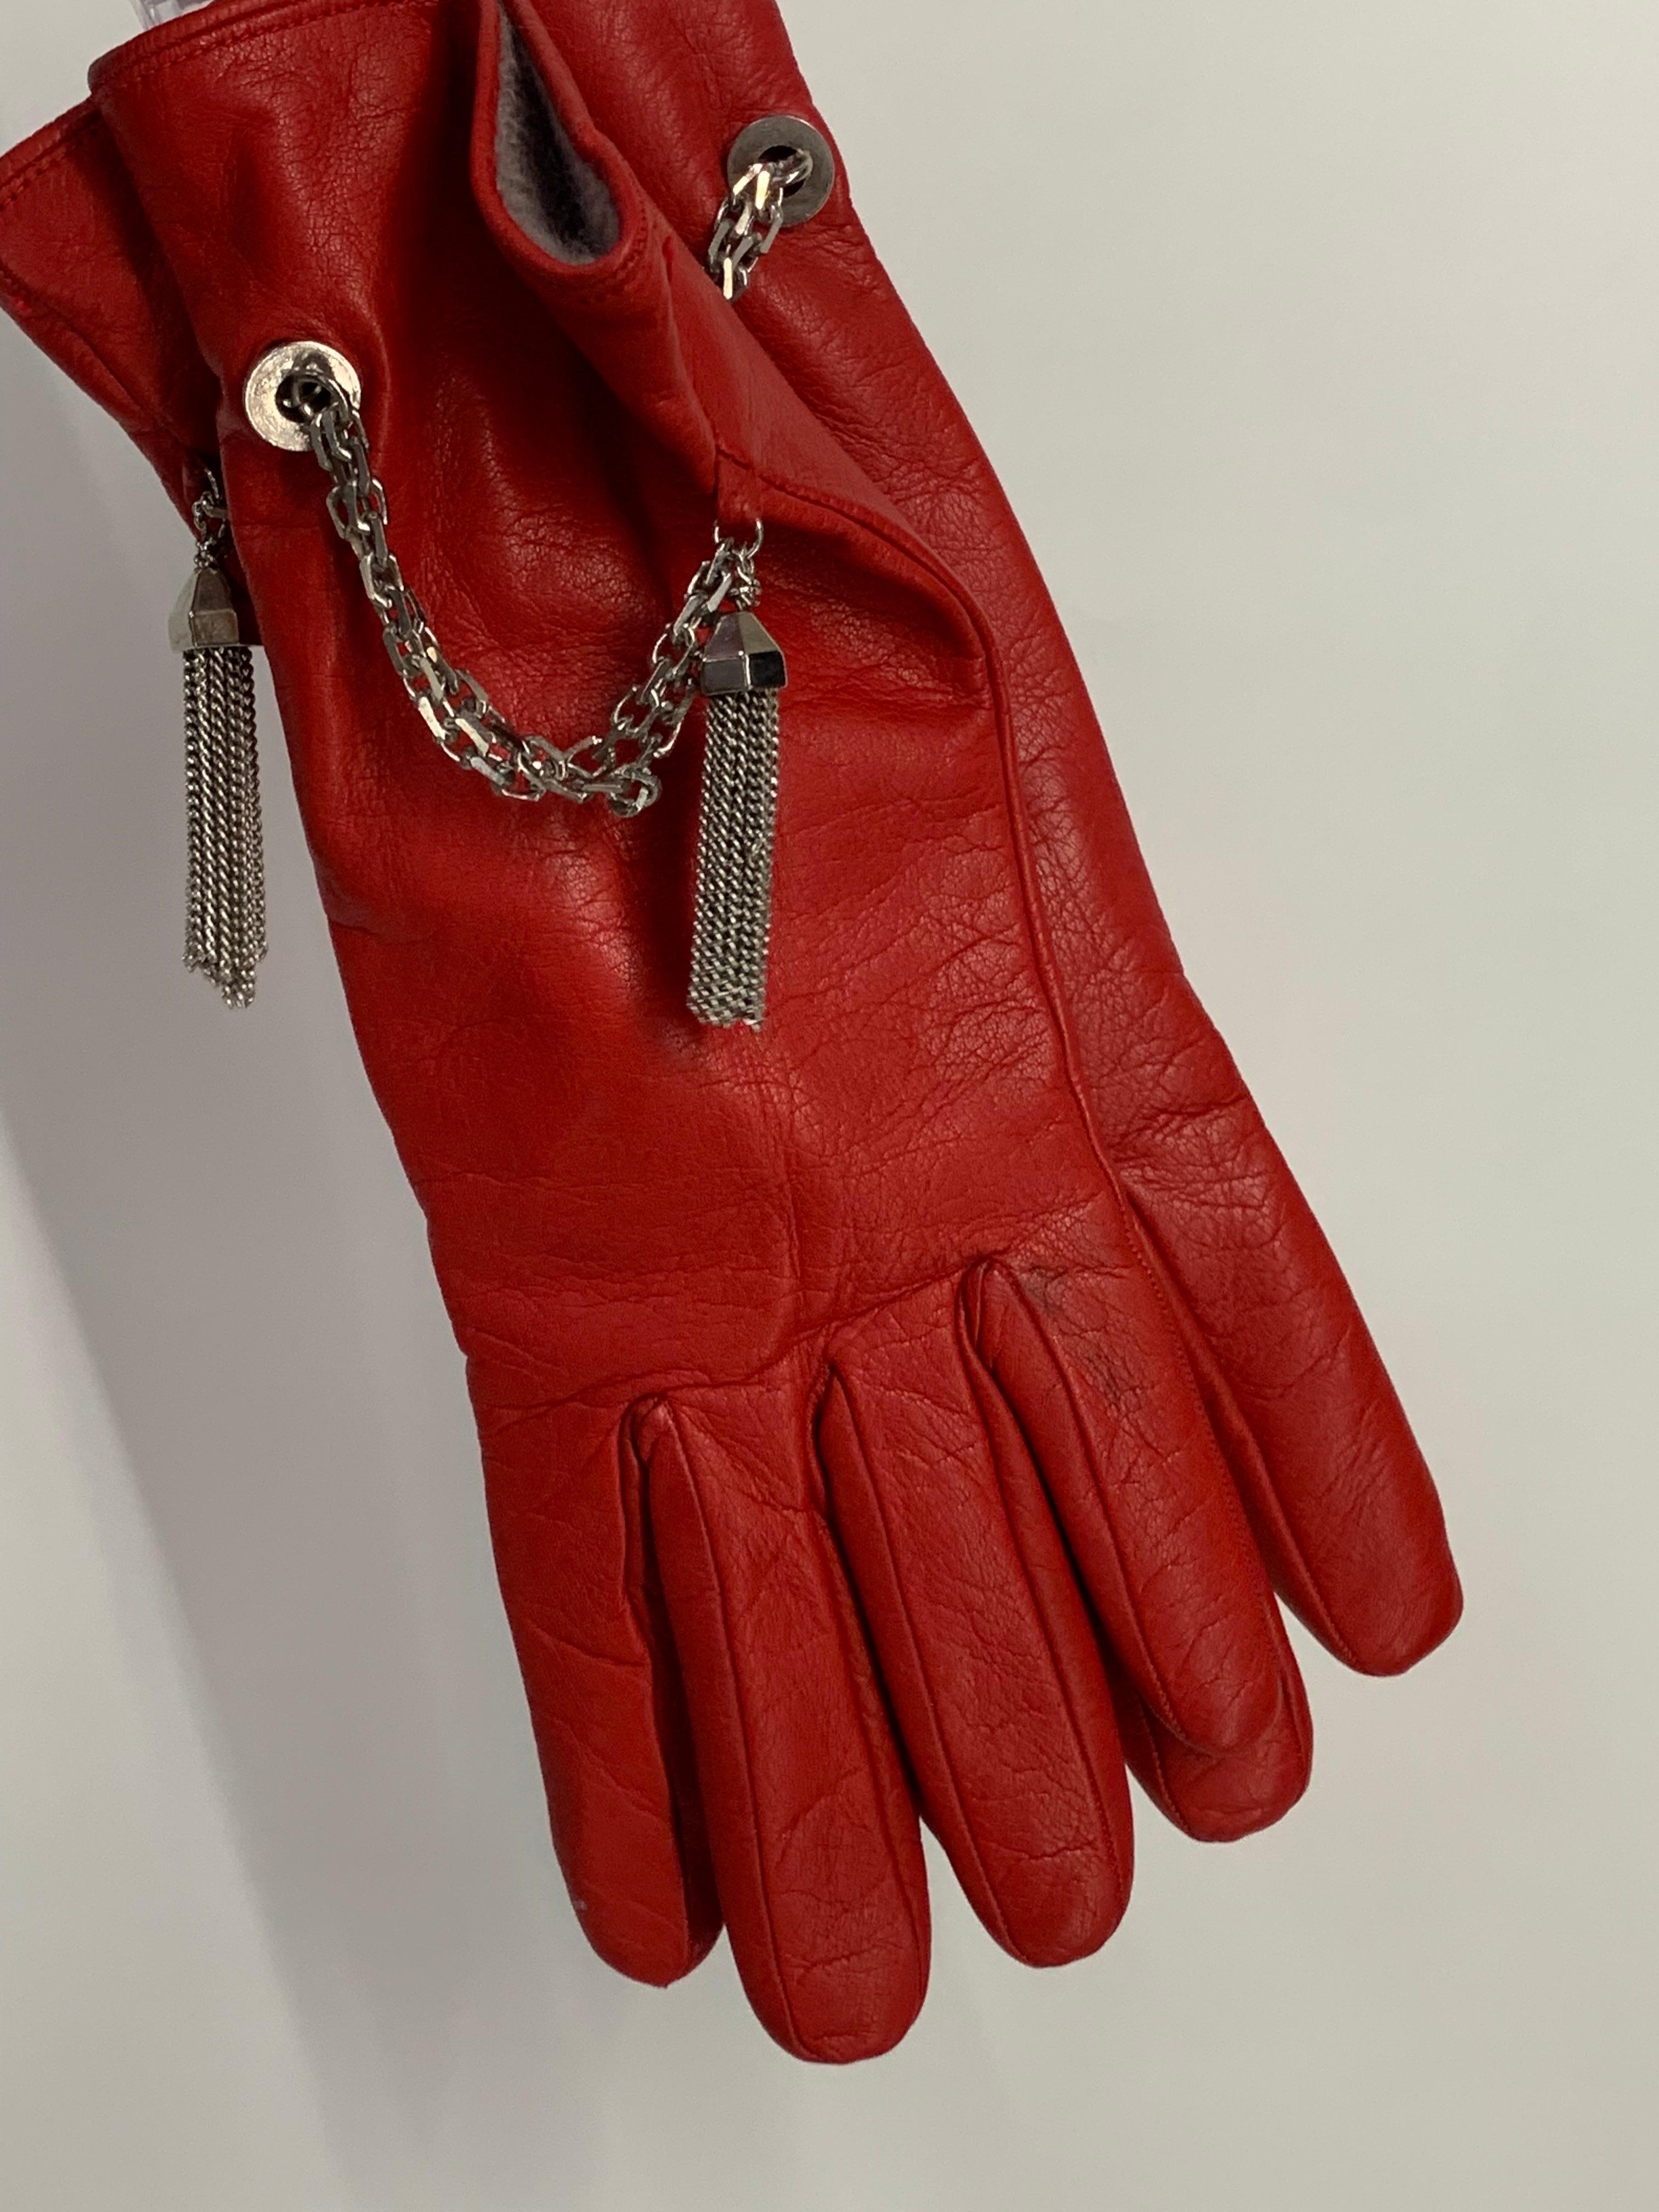 1980s Gianni Versace Red Kid Leather Gloves w Cashmere Lining & Tassel Chain  For Sale 4